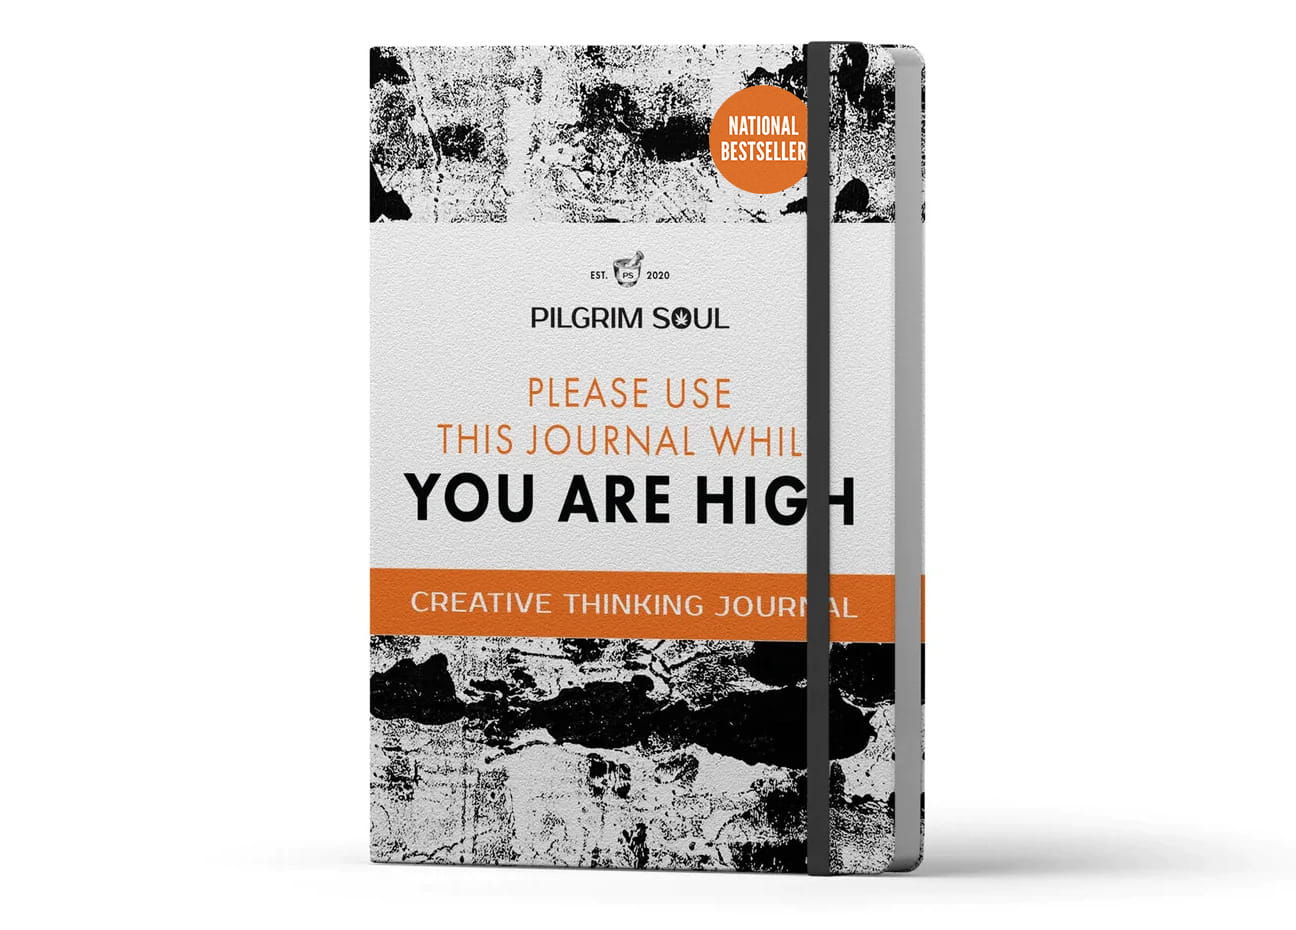 Creative Thinking Journal: Original "Use While High" Edition